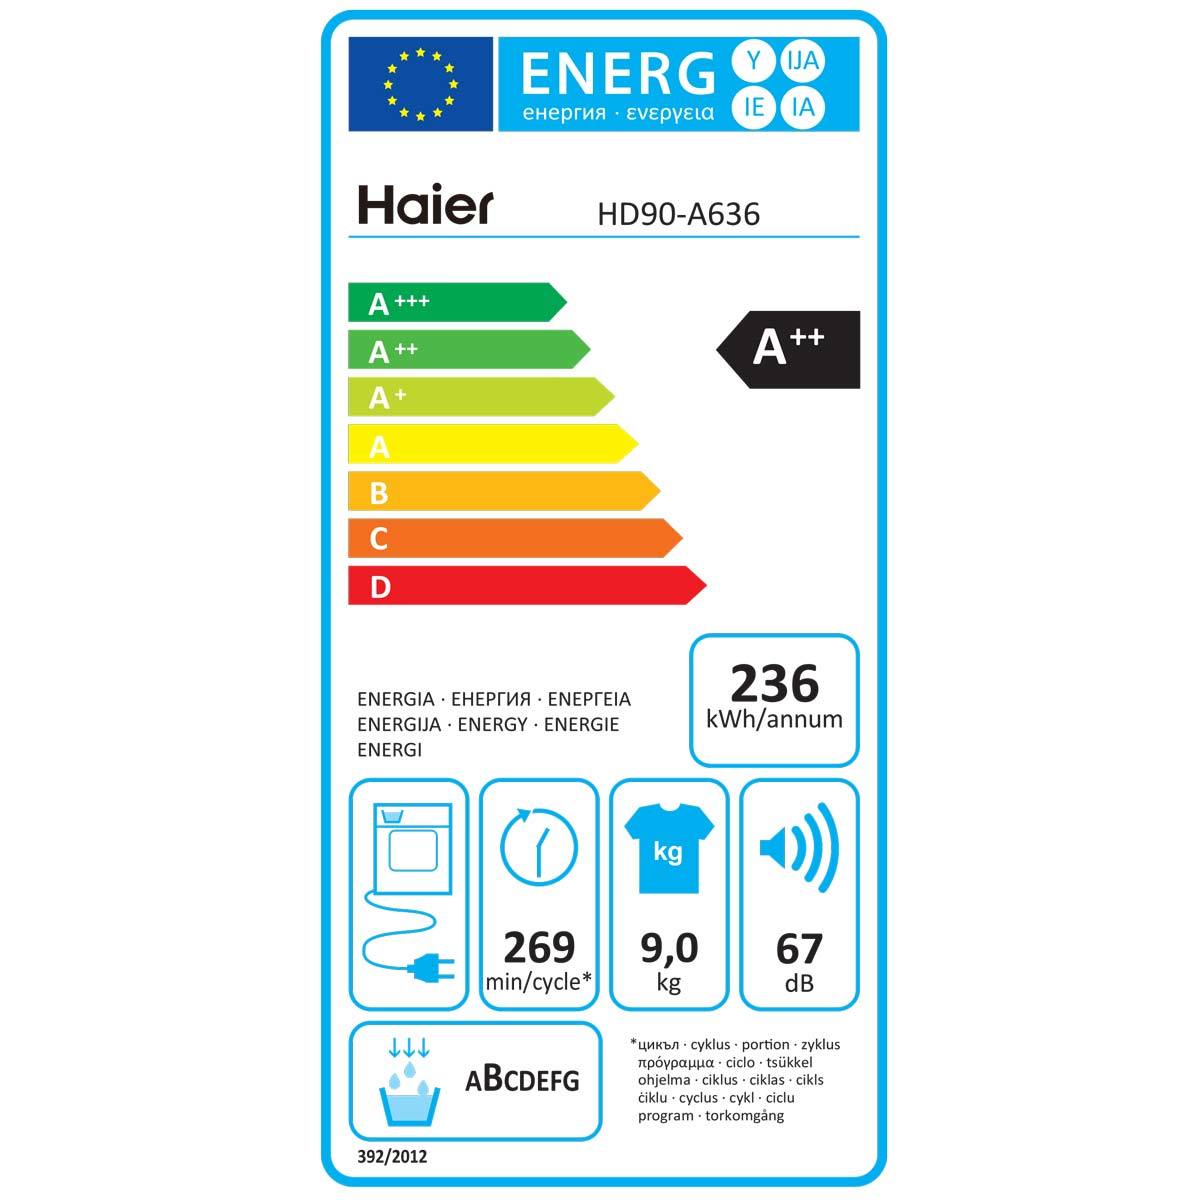 Image of Energy Rating of dryer